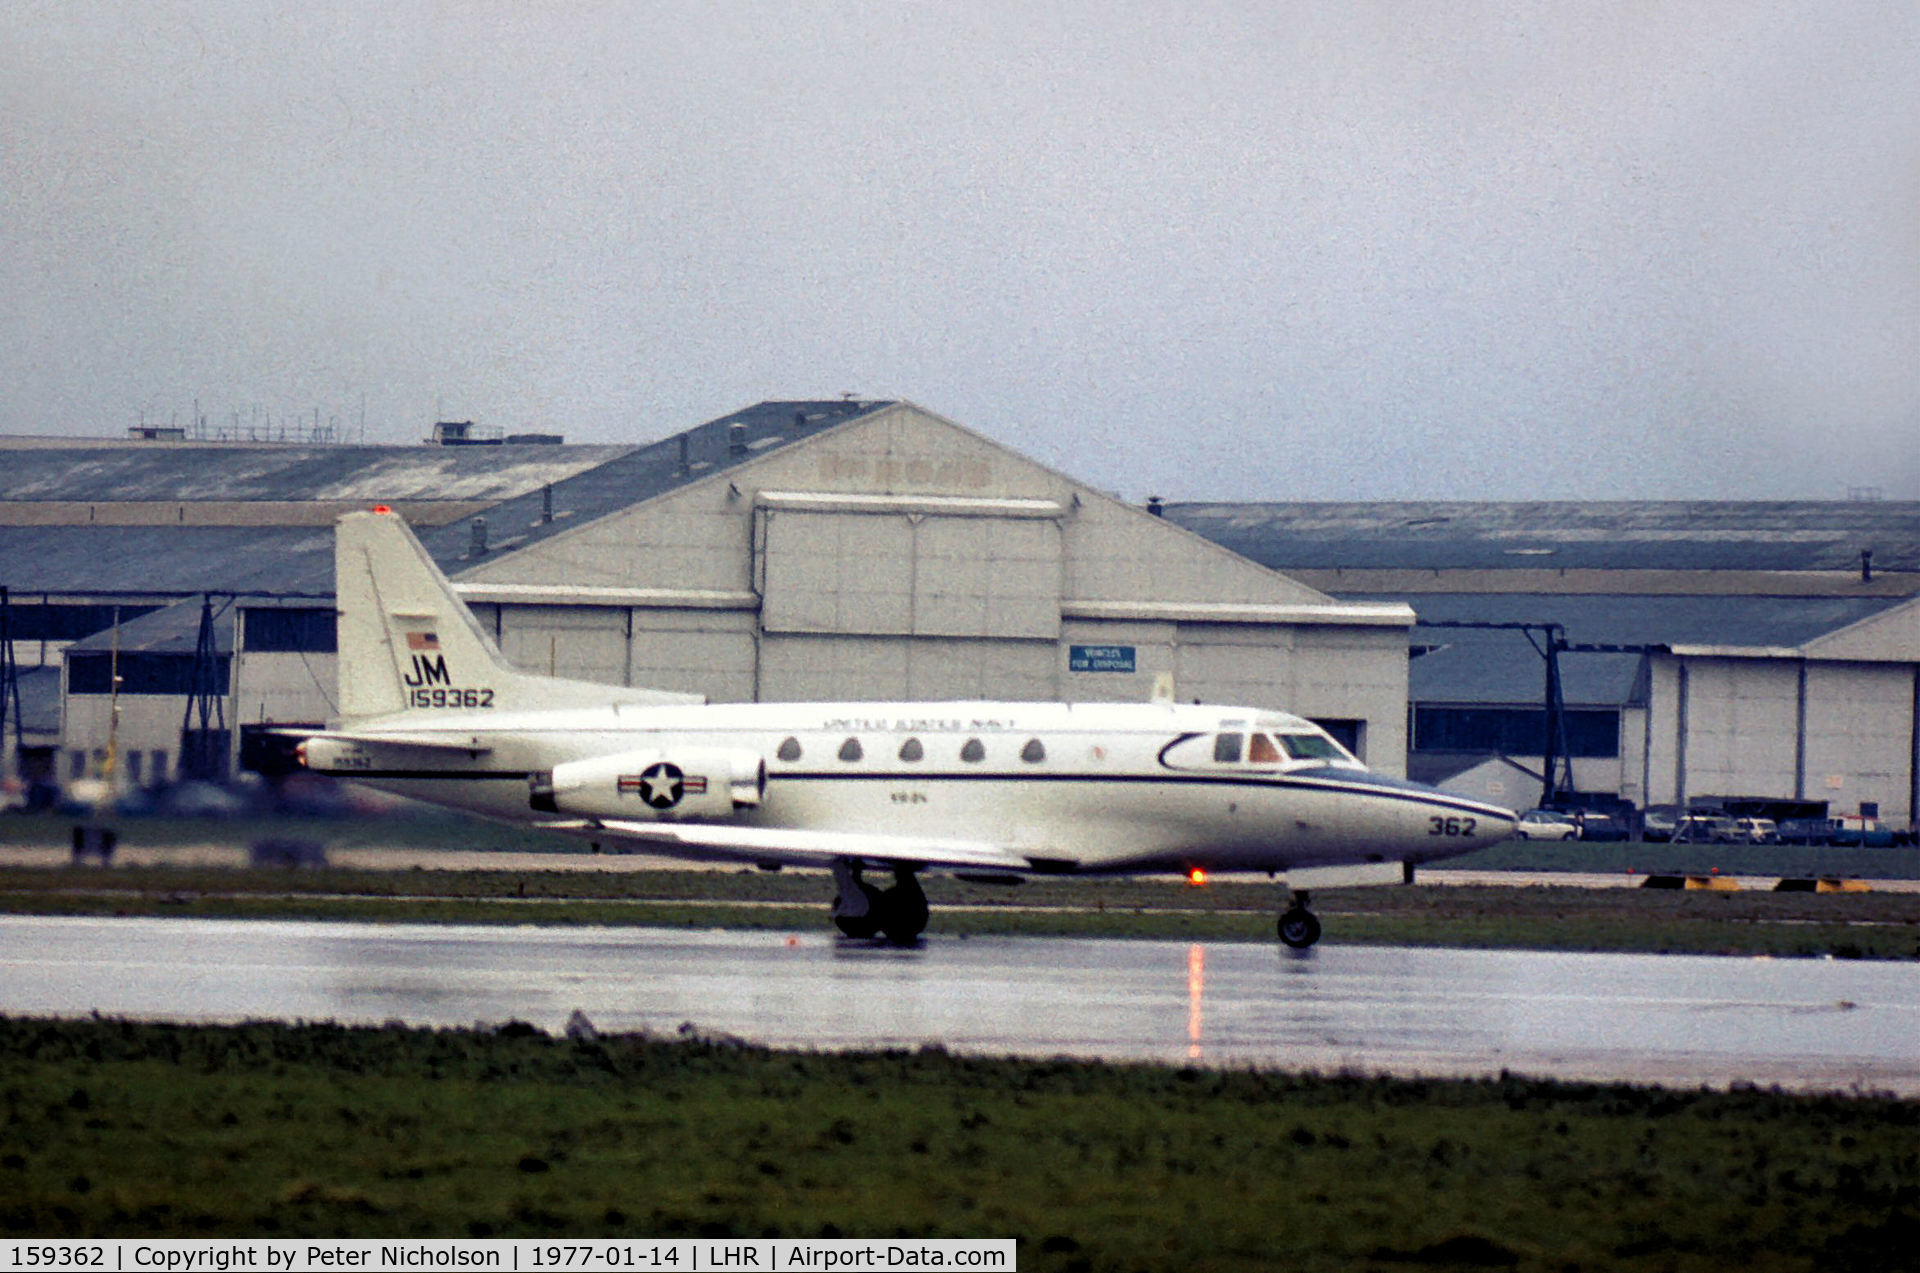 159362, North American Rockwell CT-39G Sabreliner C/N 306-66, CT-39G Sabreliner of VR-24 based at NAS Sigonella taxying at Heathrow in January 1977.